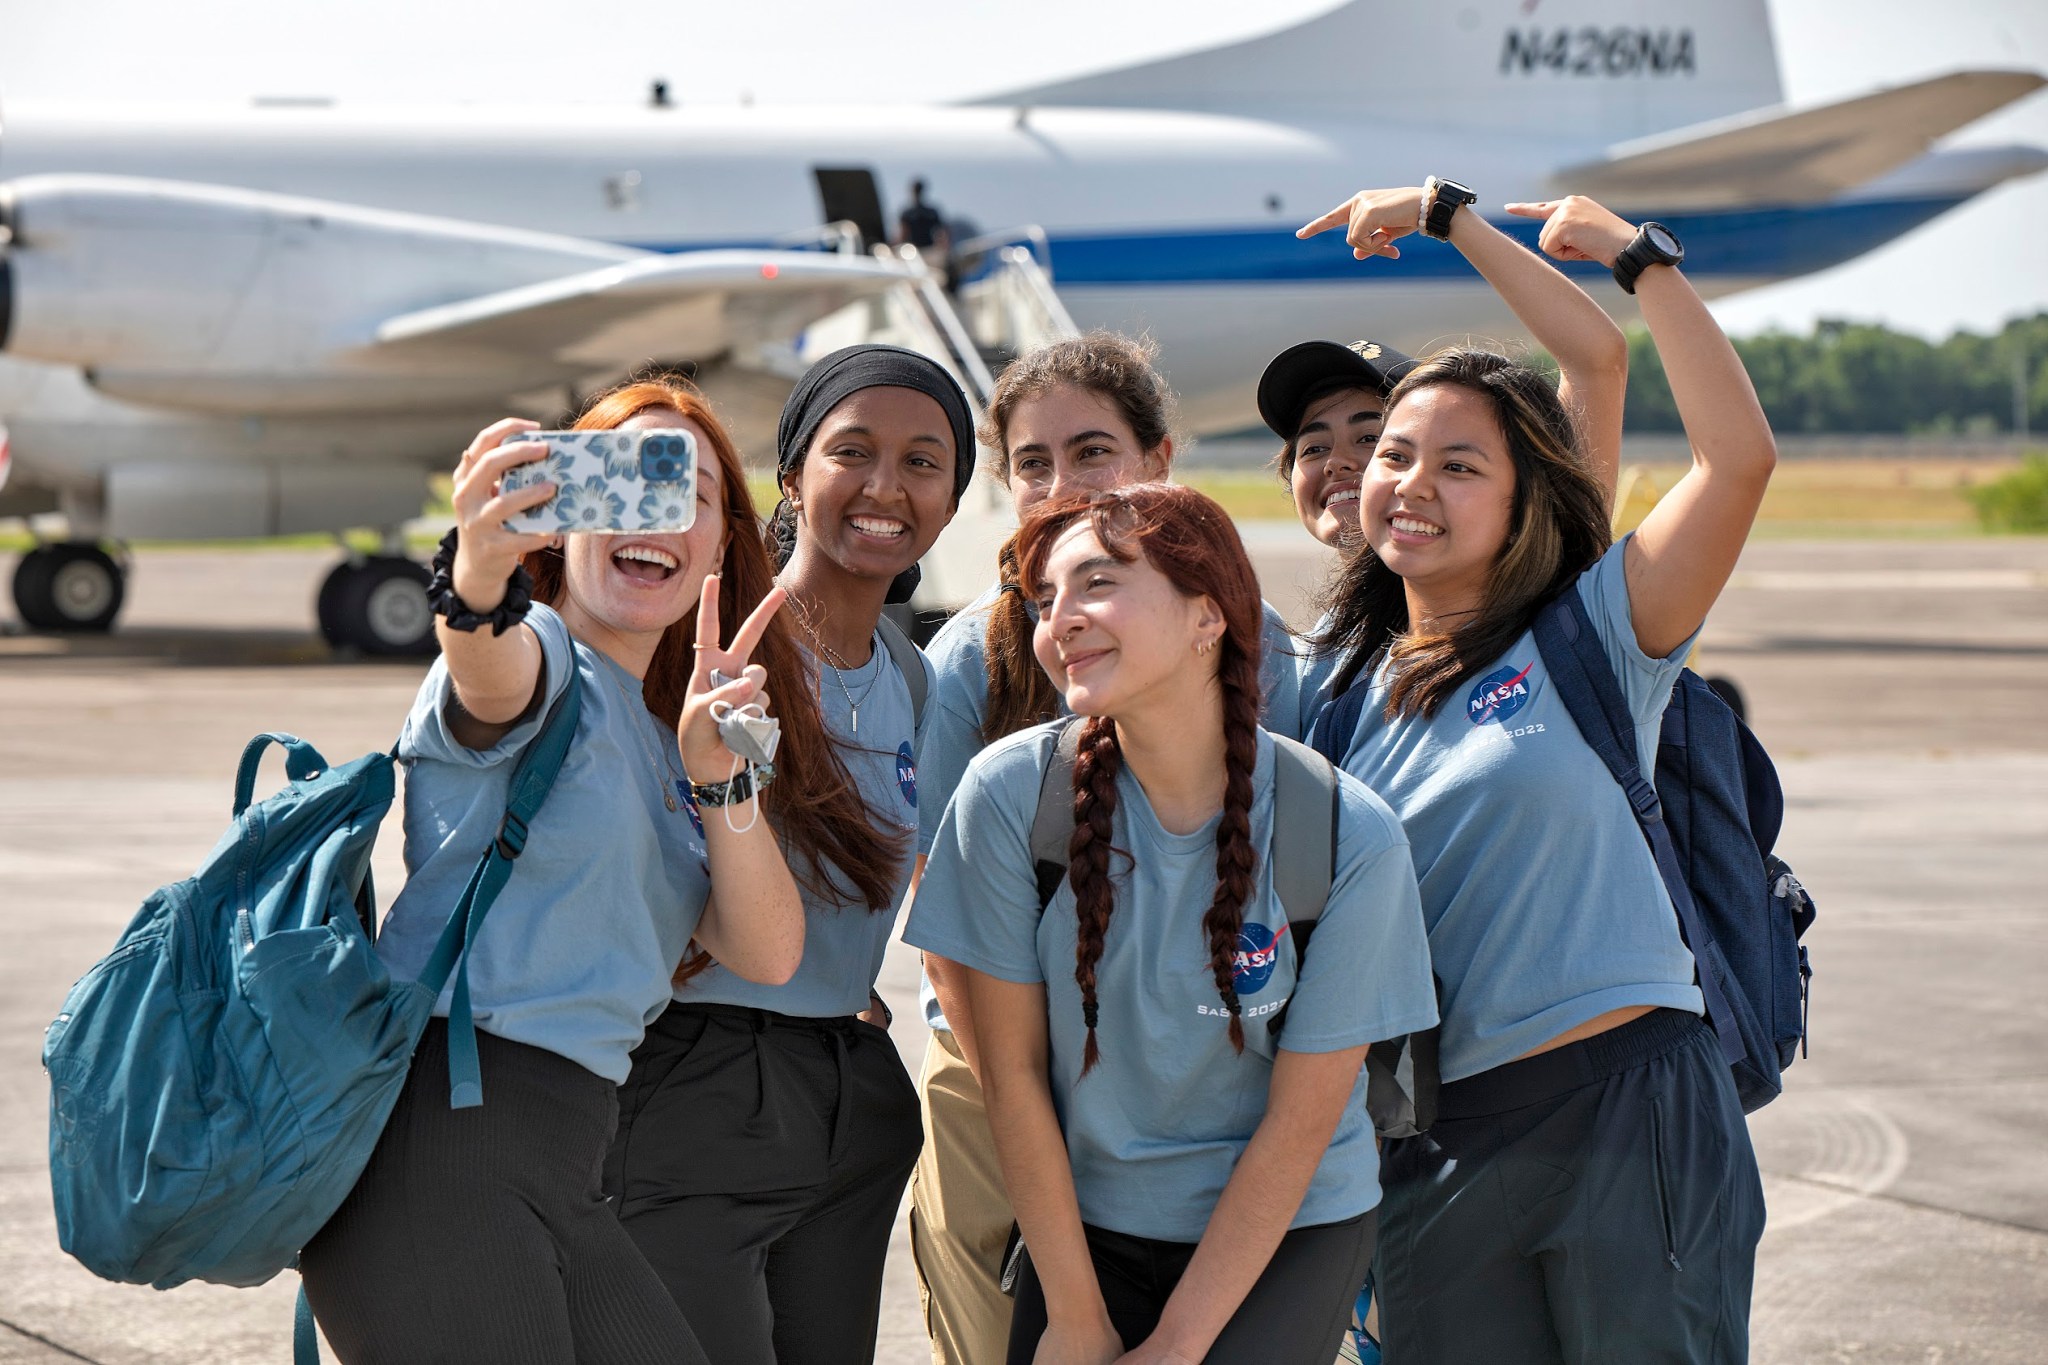 Six college students wearing light blue t-shirts with NASA logo pose taking a selfie in front of NASA's P-3 research aircraft